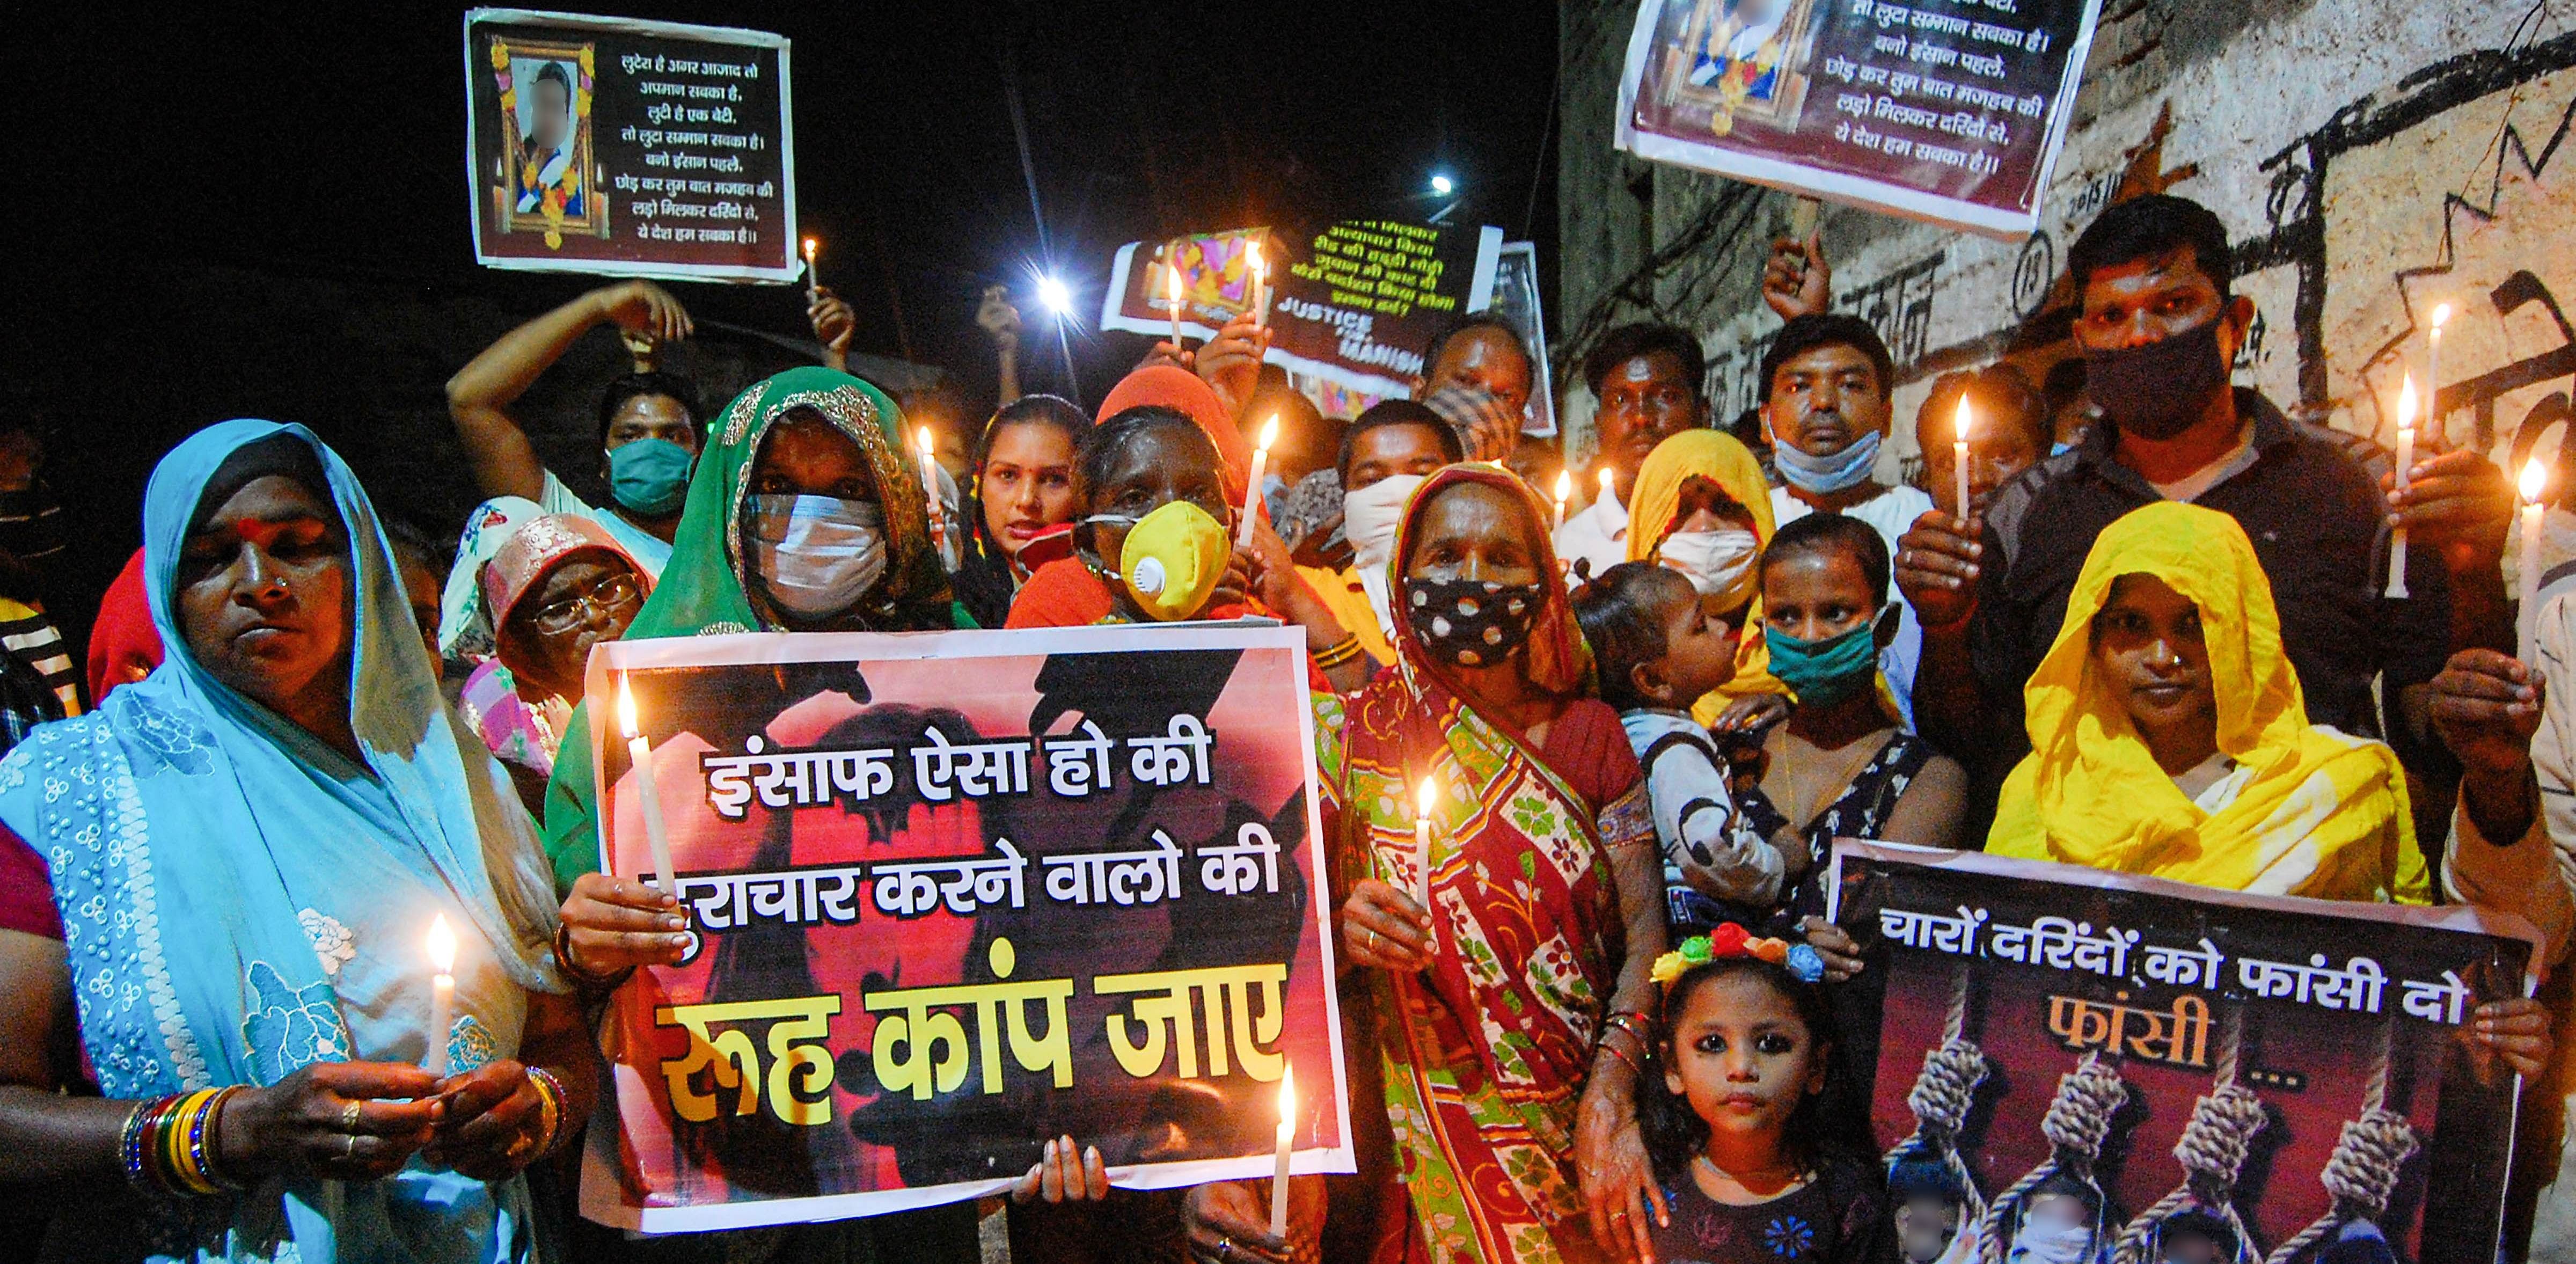 Members of Valmiki community during a protest against the death of a 19-year-old Dalit woman who was allegedly gang-raped in Hathras, in Kanpur. Credit: PTI